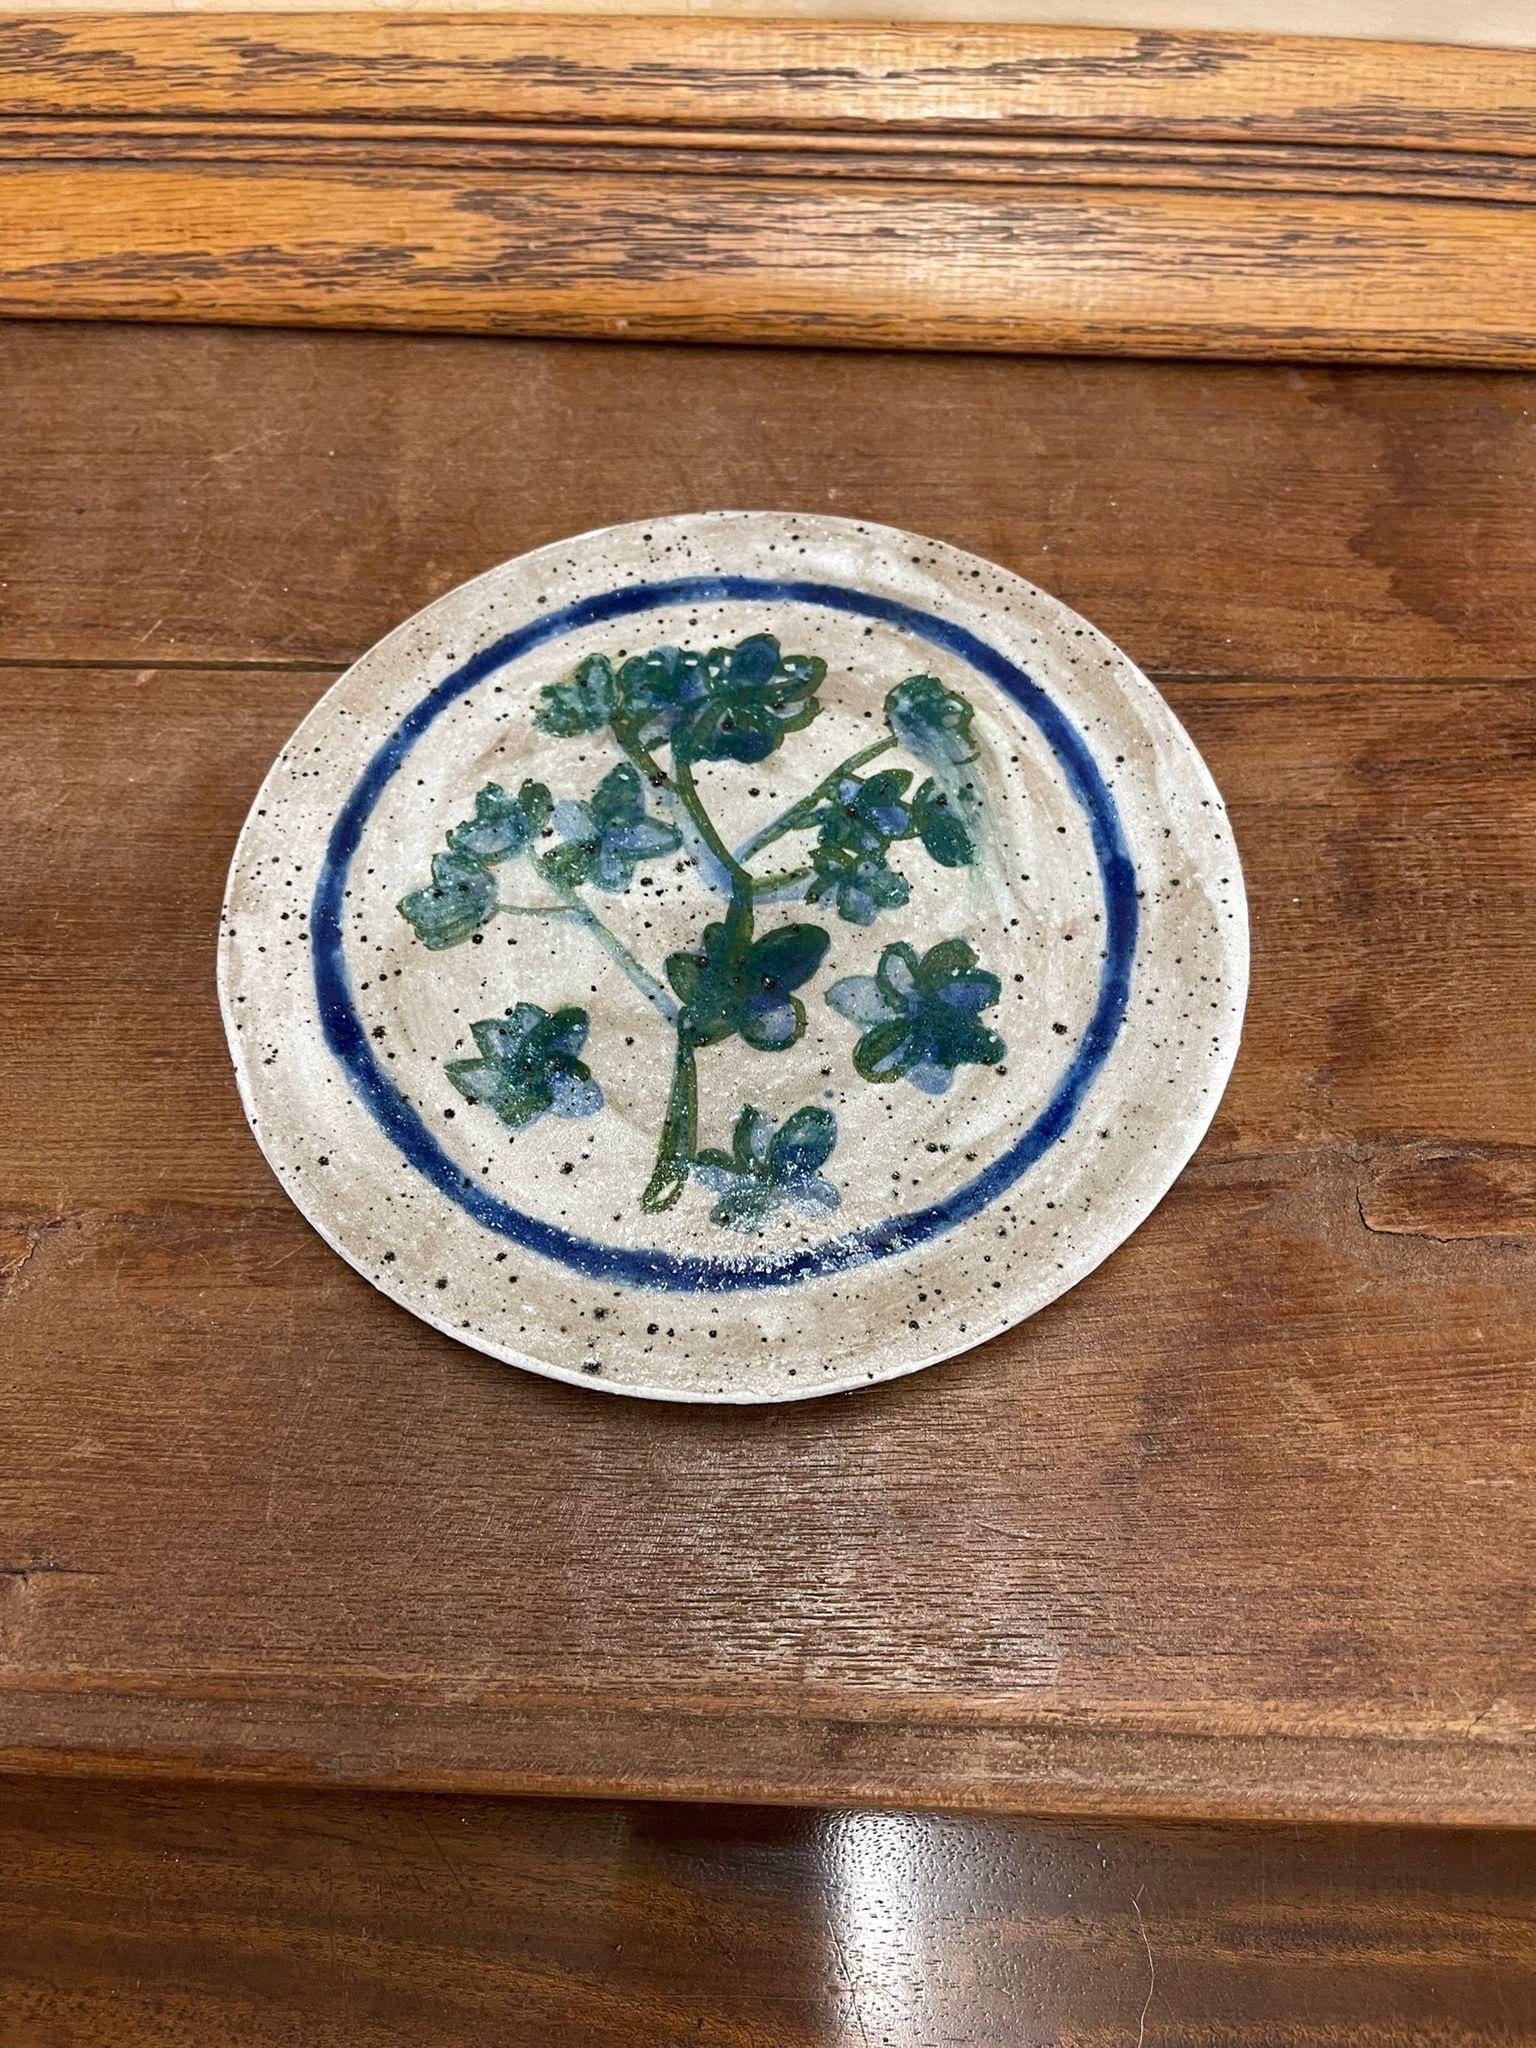 This plate has a beautiful blue floral motif with a blue ring around it. Speckled glass. Vintage Condition Consistent with Age as Pictured.

Dimensions. 7 Diameter ; 0.50 H